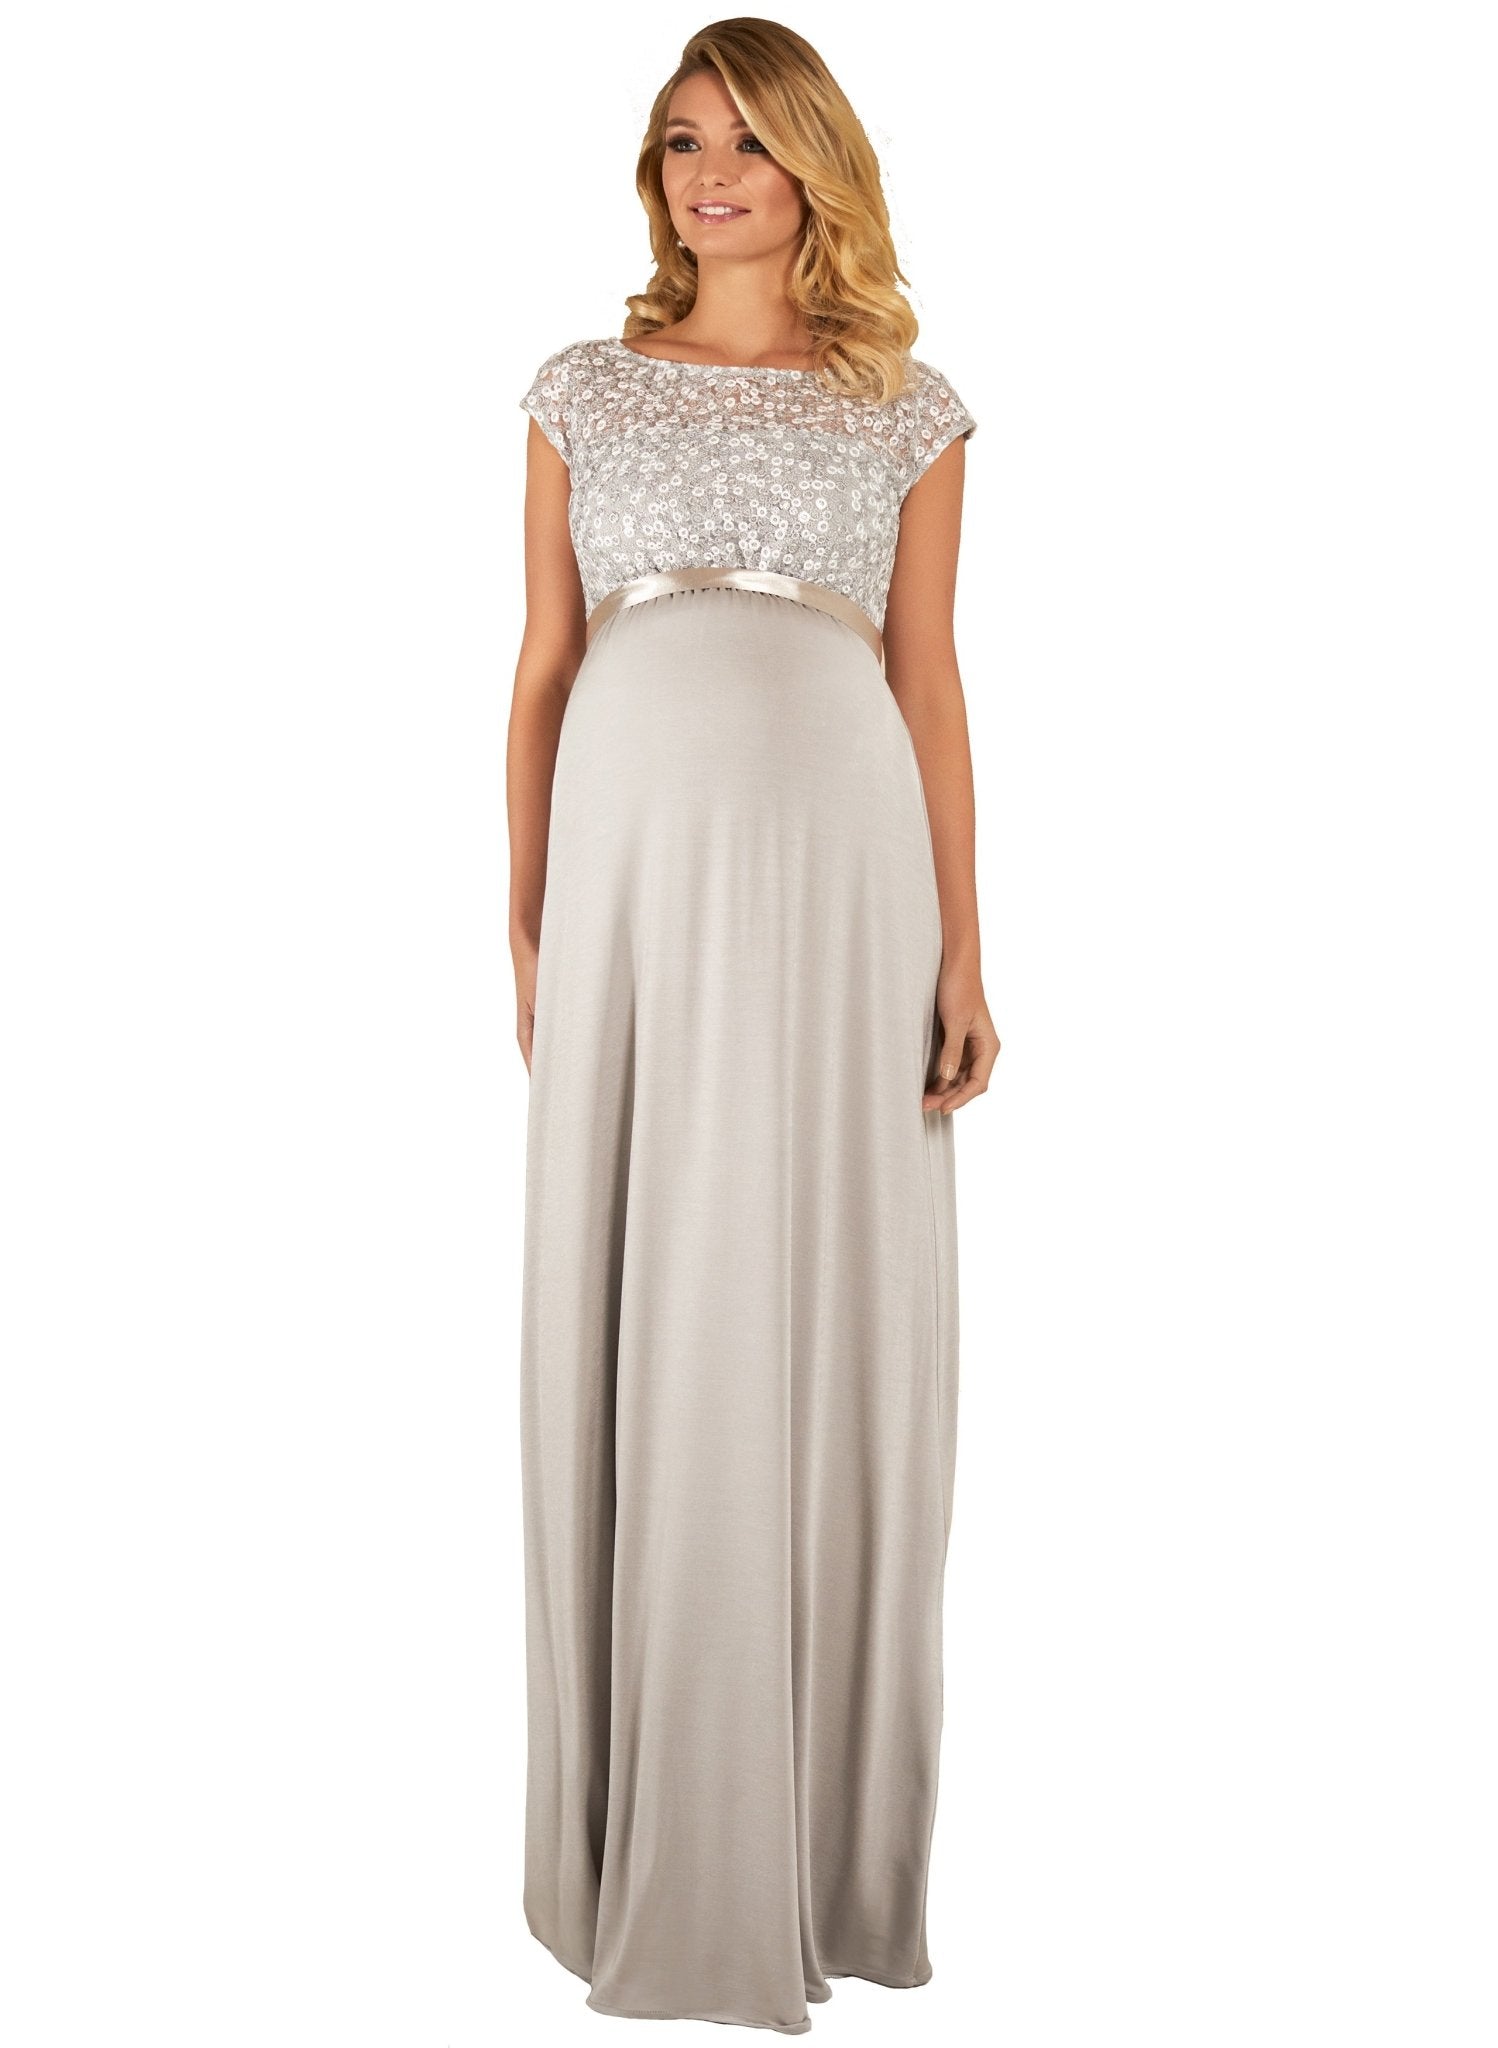 Mia Maternity Gown - Silver - Mums and Bumps